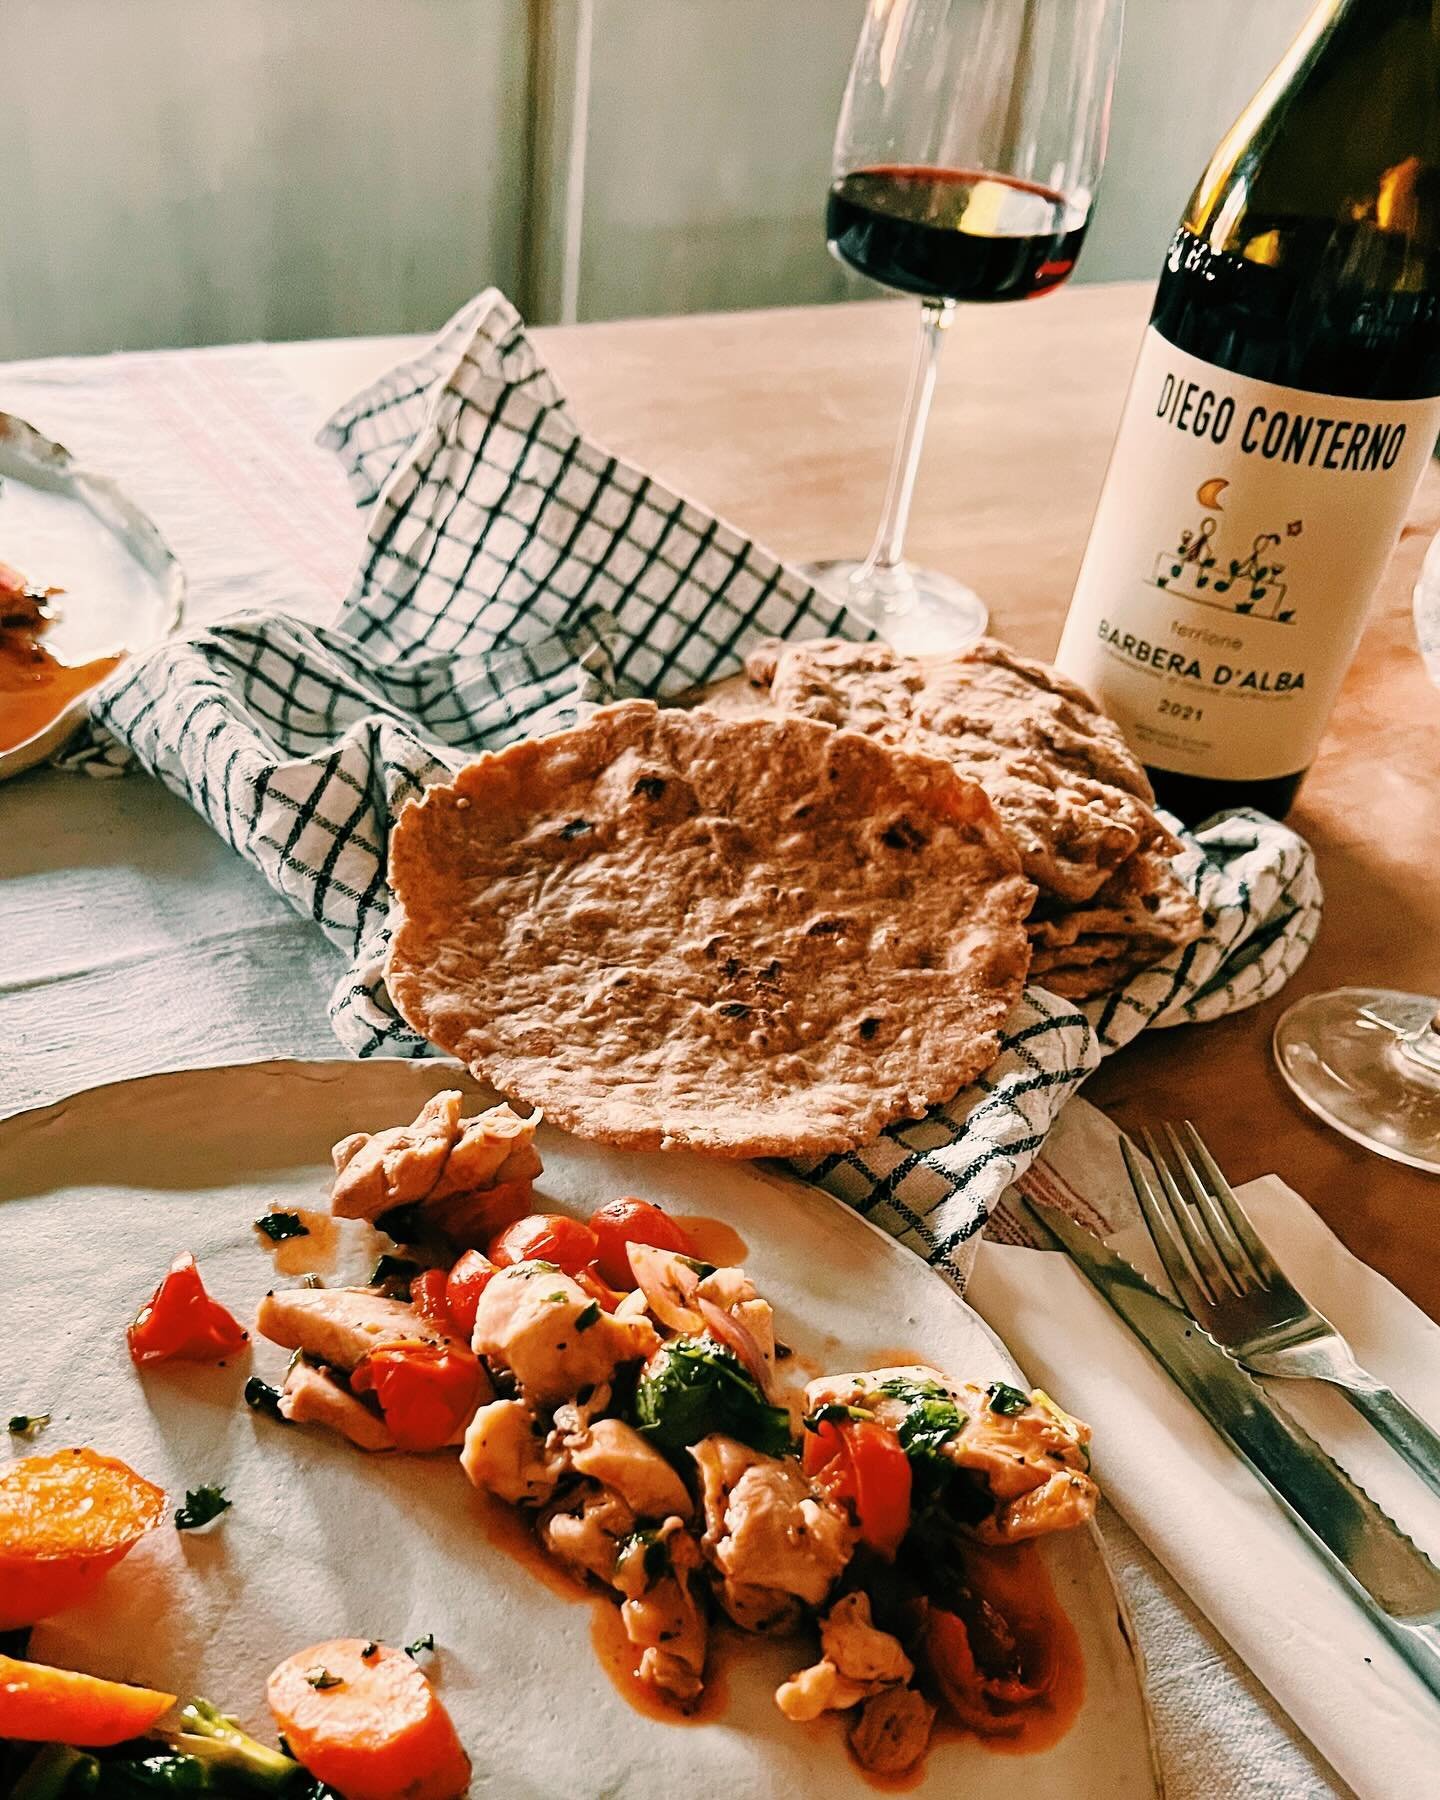 SATURDAY SUPPER

The summer like weather brought with it a yen for fresh, healthy flavors.

Chicken fajitas with homemade whole grain tortillas, served with carrots and Brussels sprout flowers and the perfect wine pairing, @diegoconterno 2021 Barbera